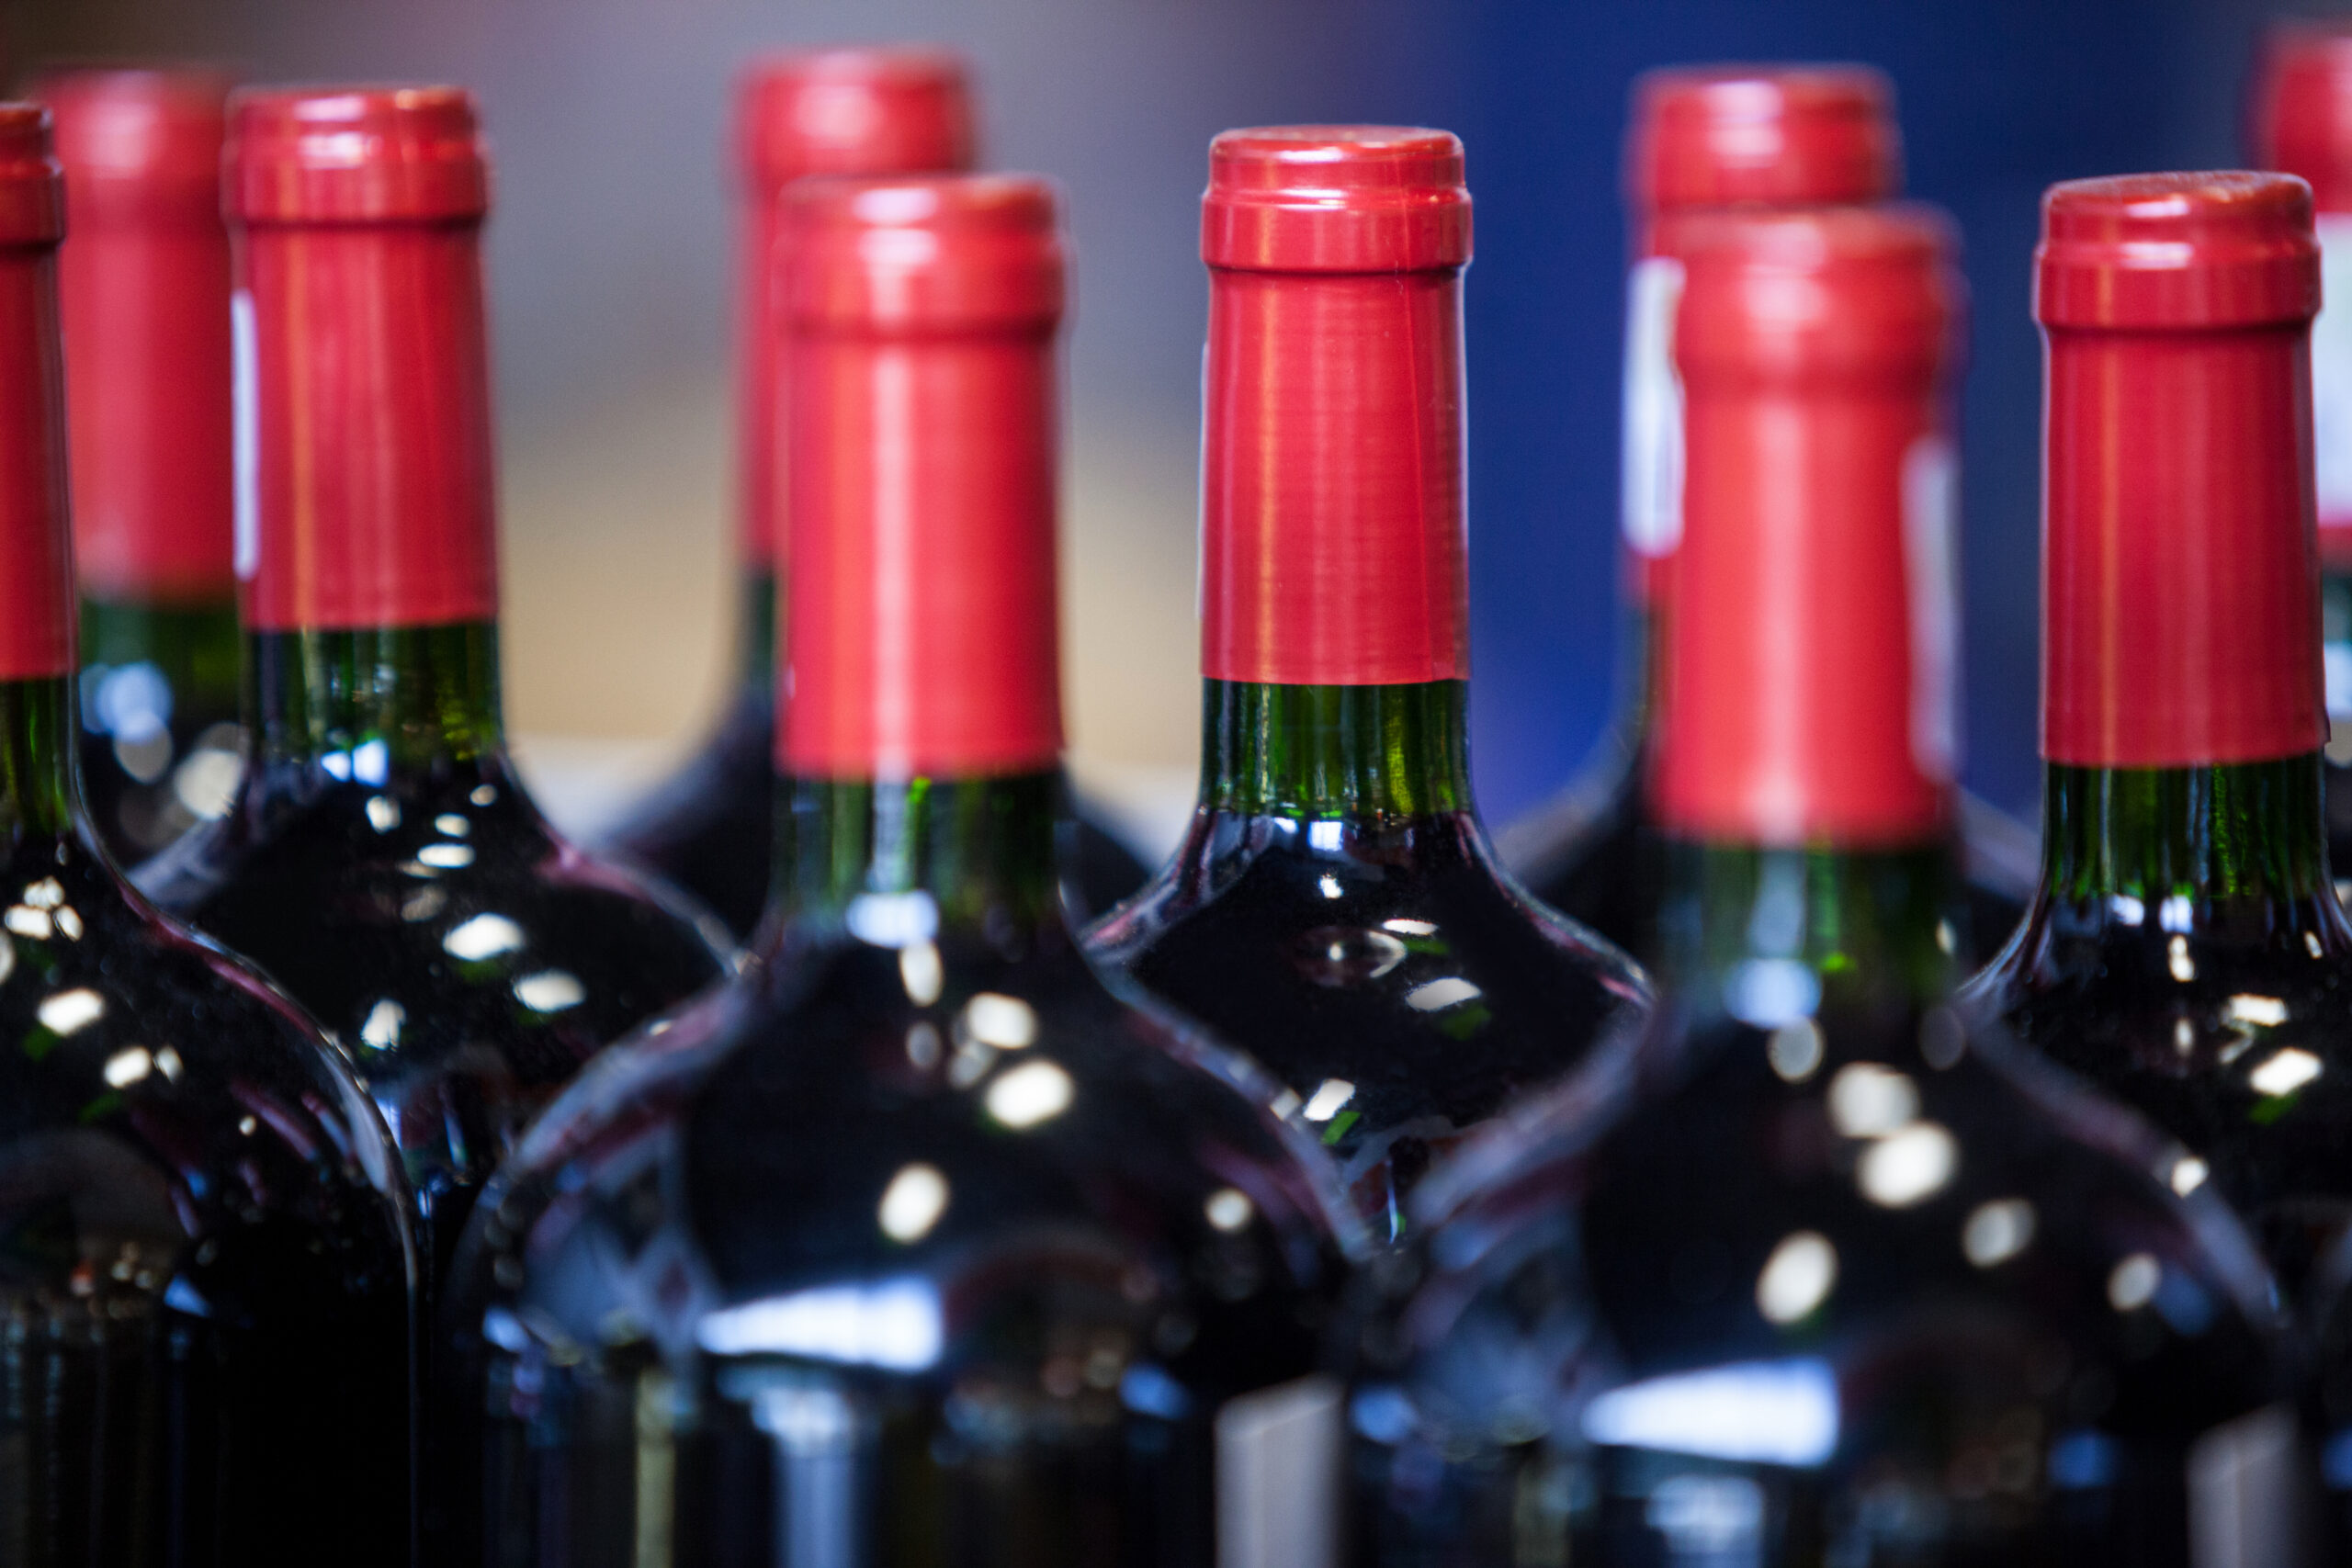 Close-up of wine bottles with red foil wrapping.